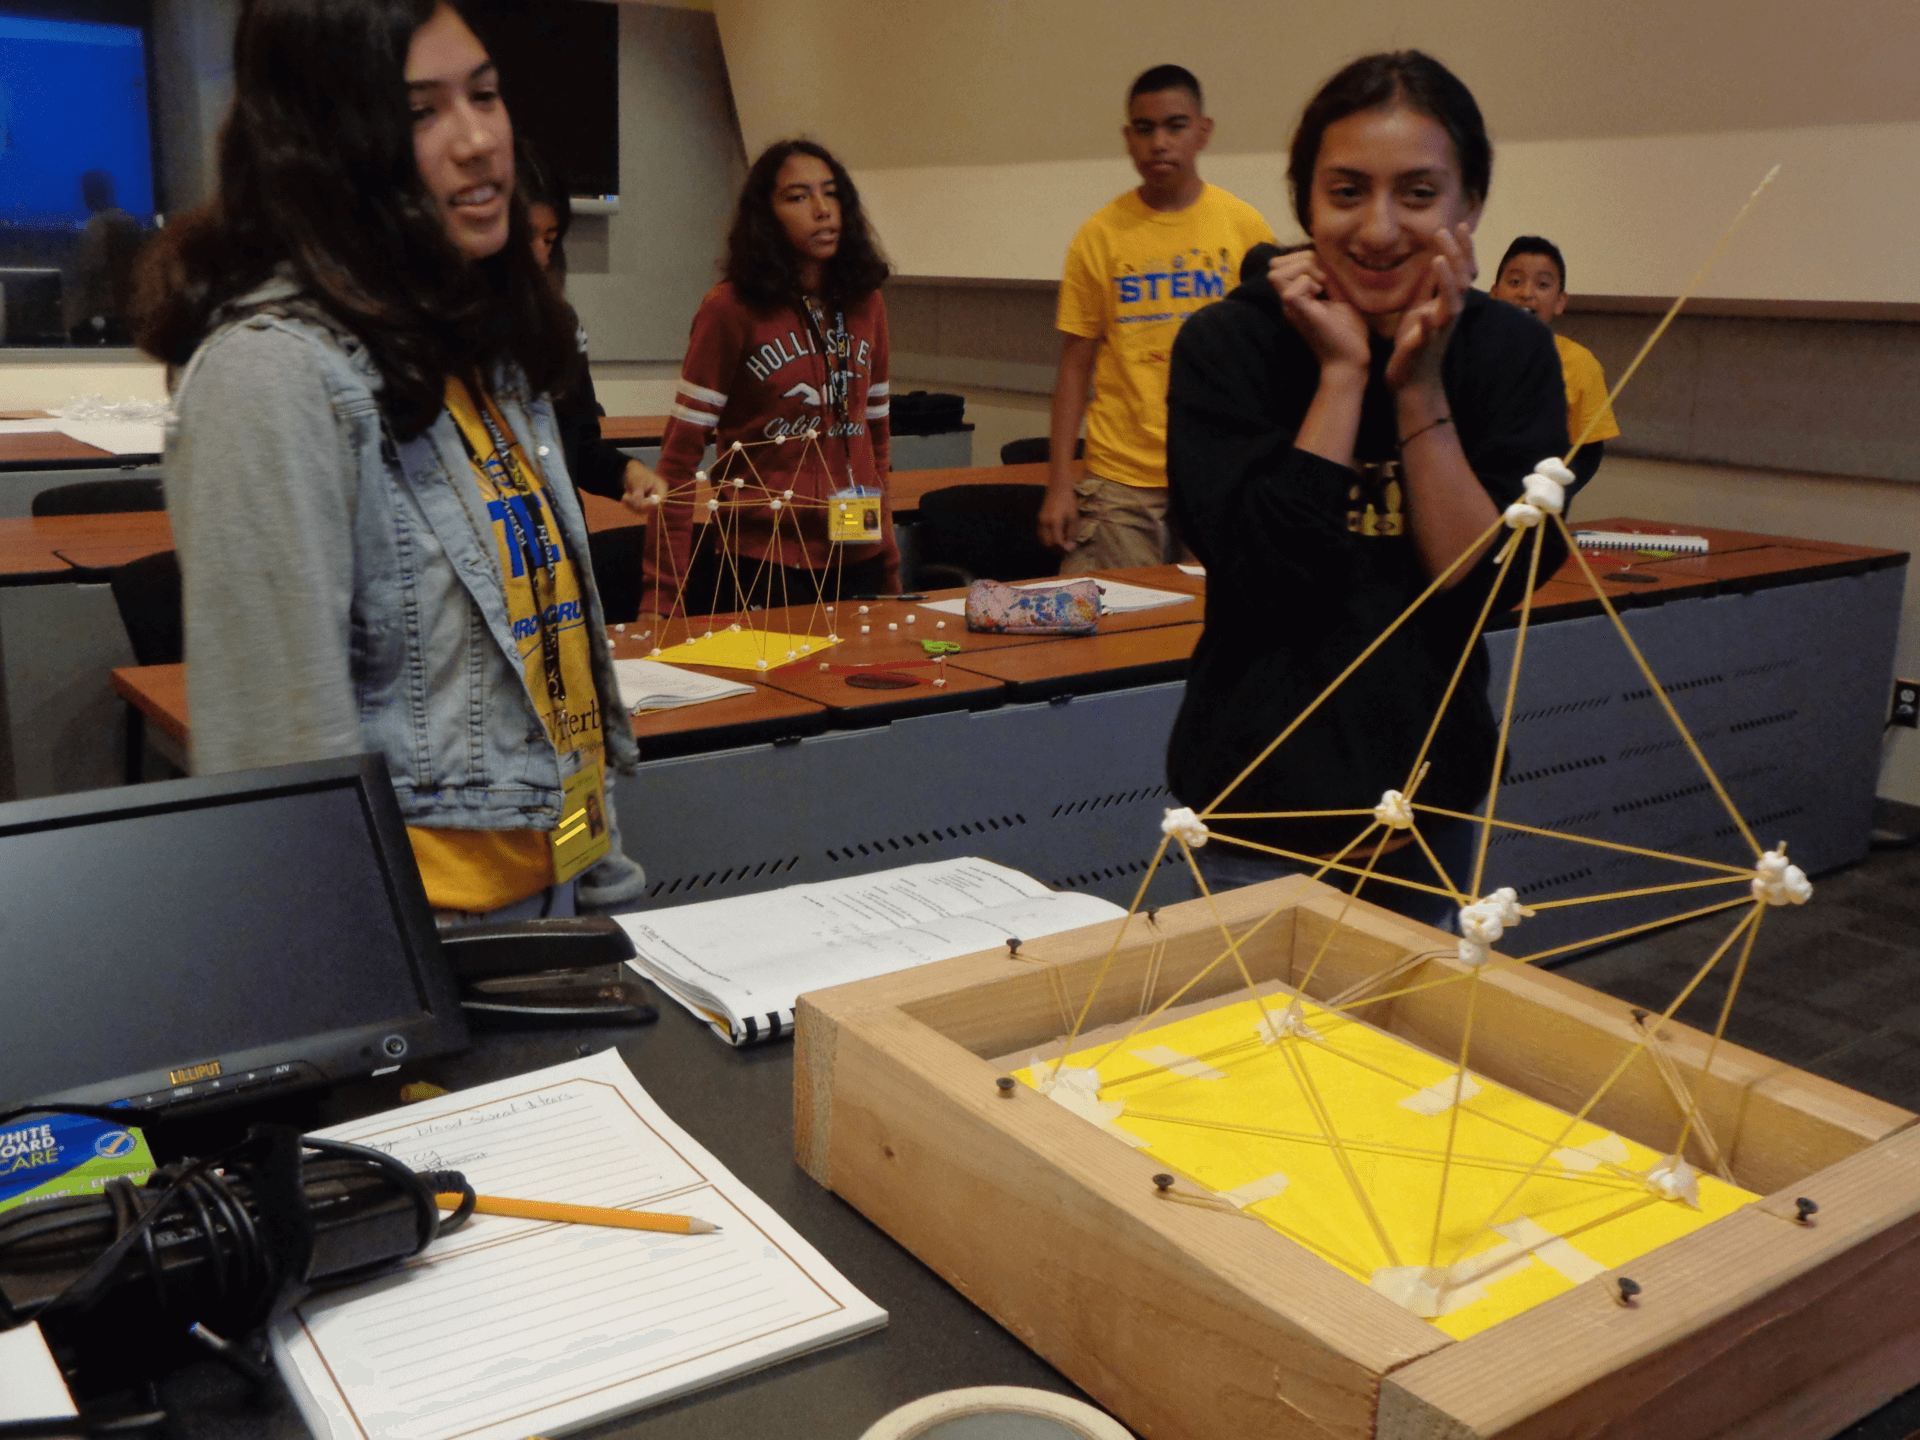 Students testing the stability of their spaghetti tower challenge
